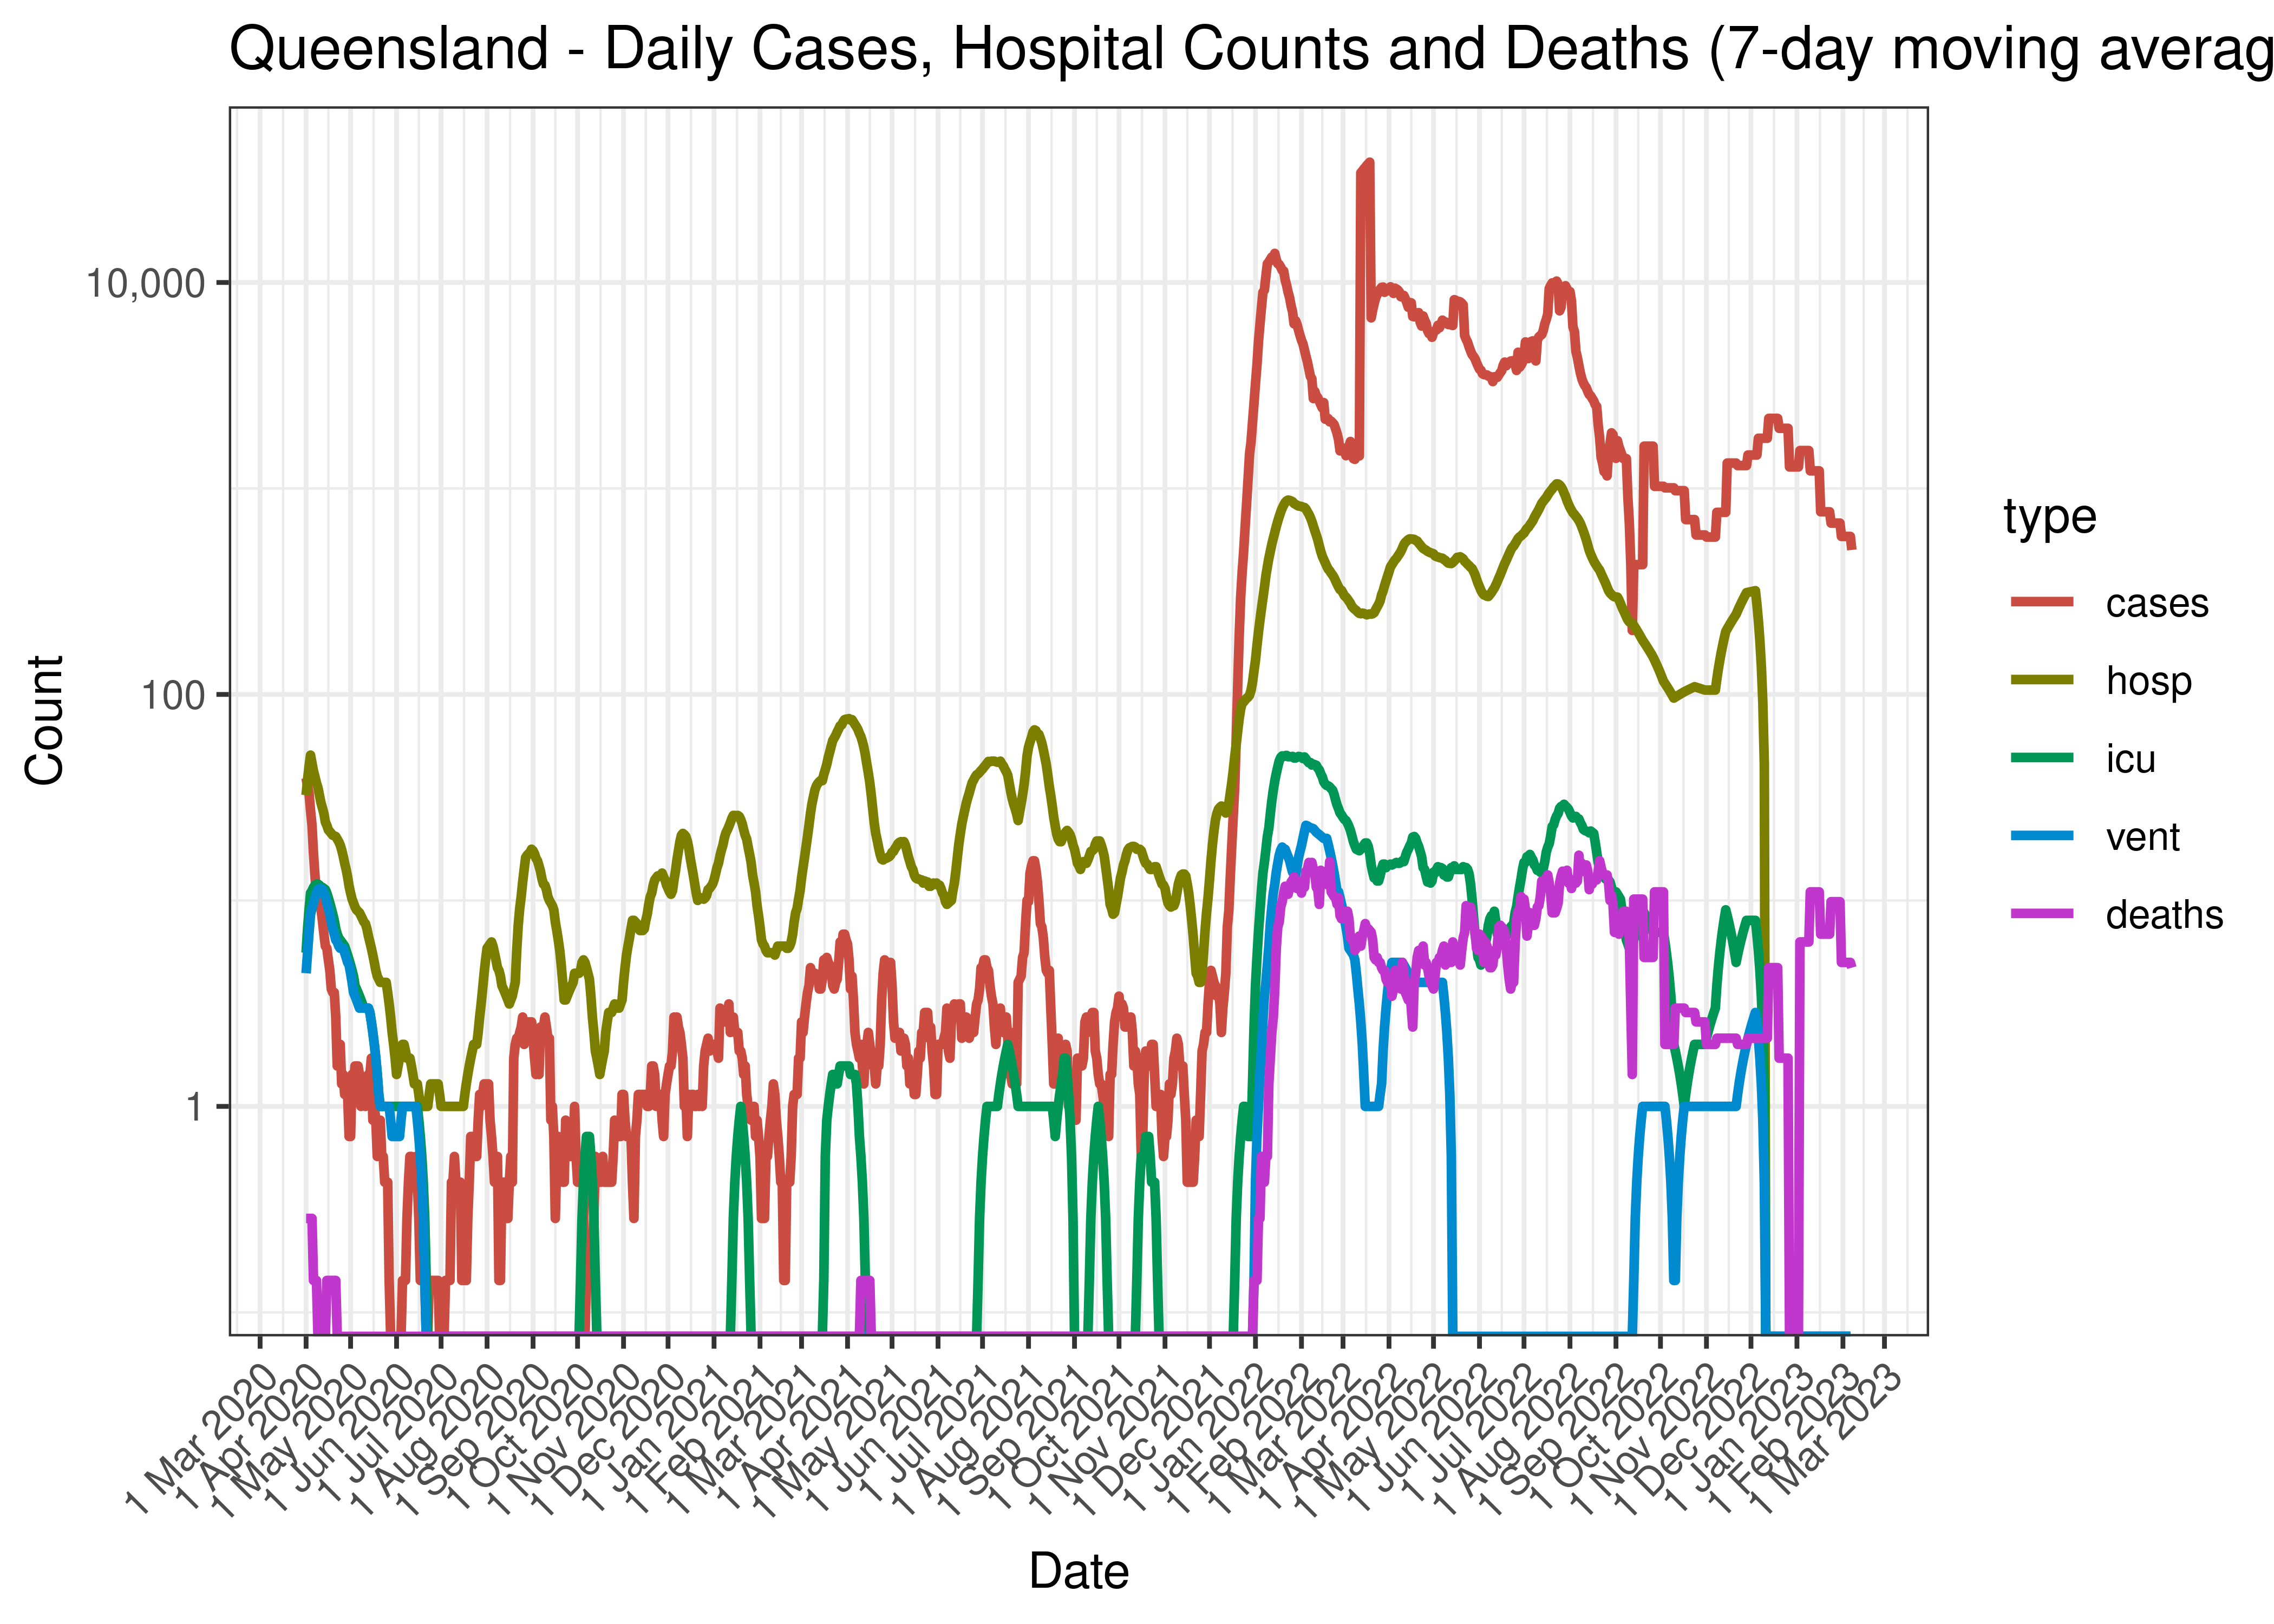 Queensland - Daily ICU Counts (7-day moving average)